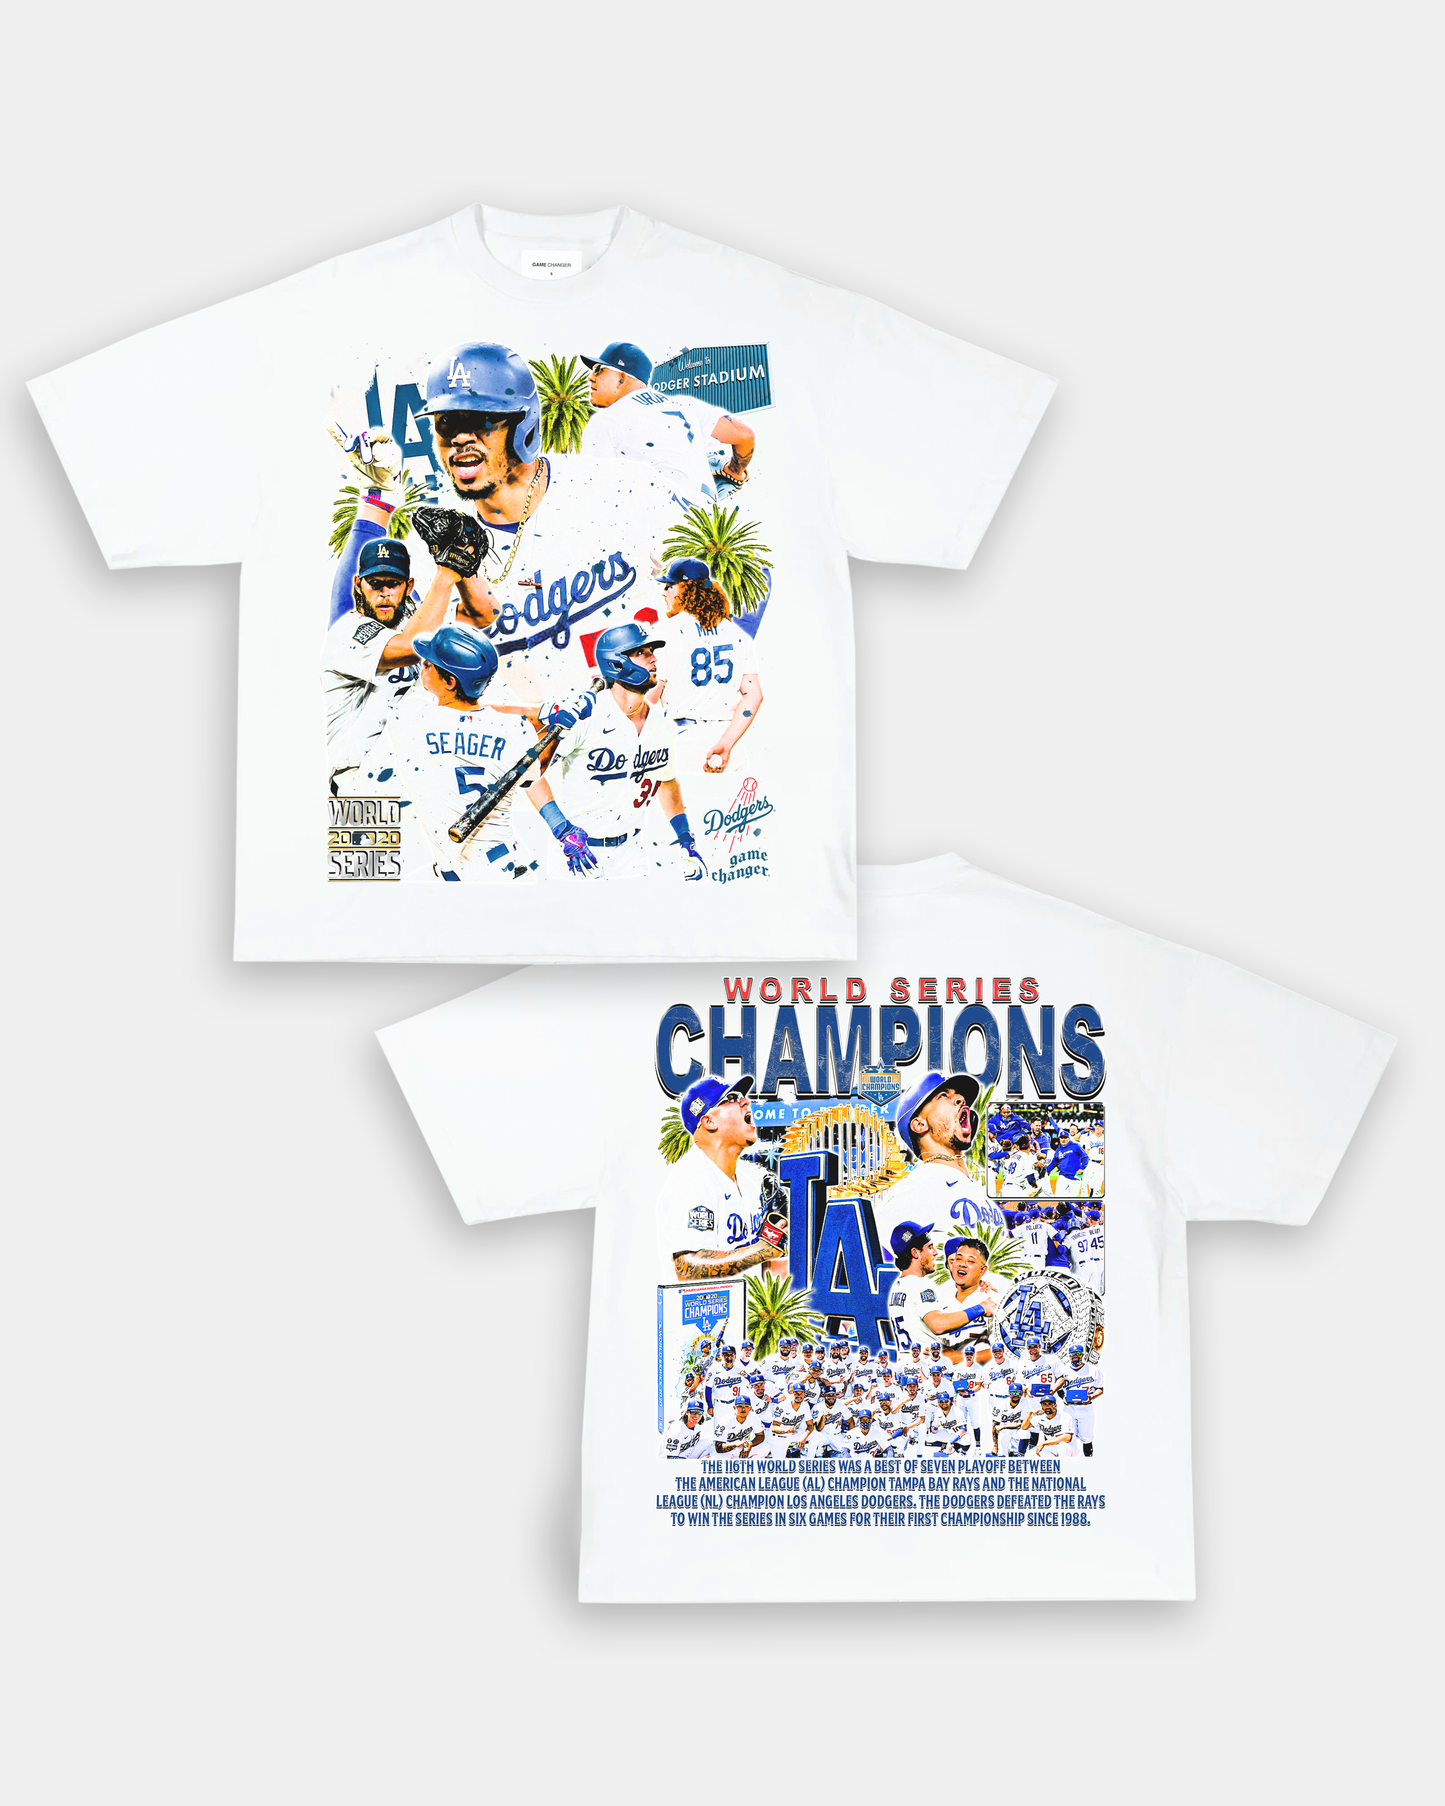 2020 WORLD SERIES CHAMPS - DODGERS TEE - [DS]